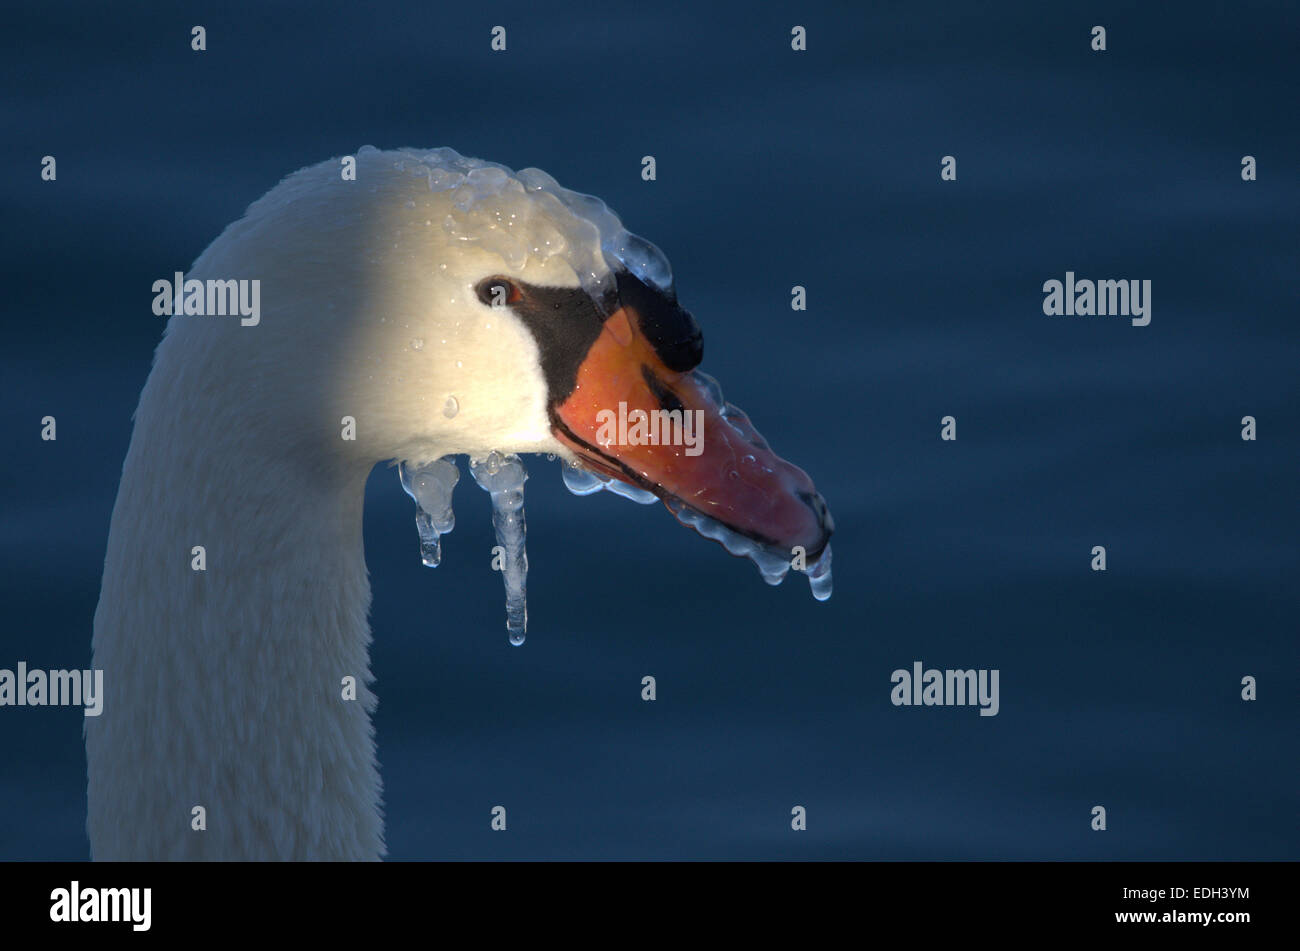 Frozen Mute Swan on the Detroit River in Windsor, Ontario during the Polar Vortex of 2014. Stock Photo